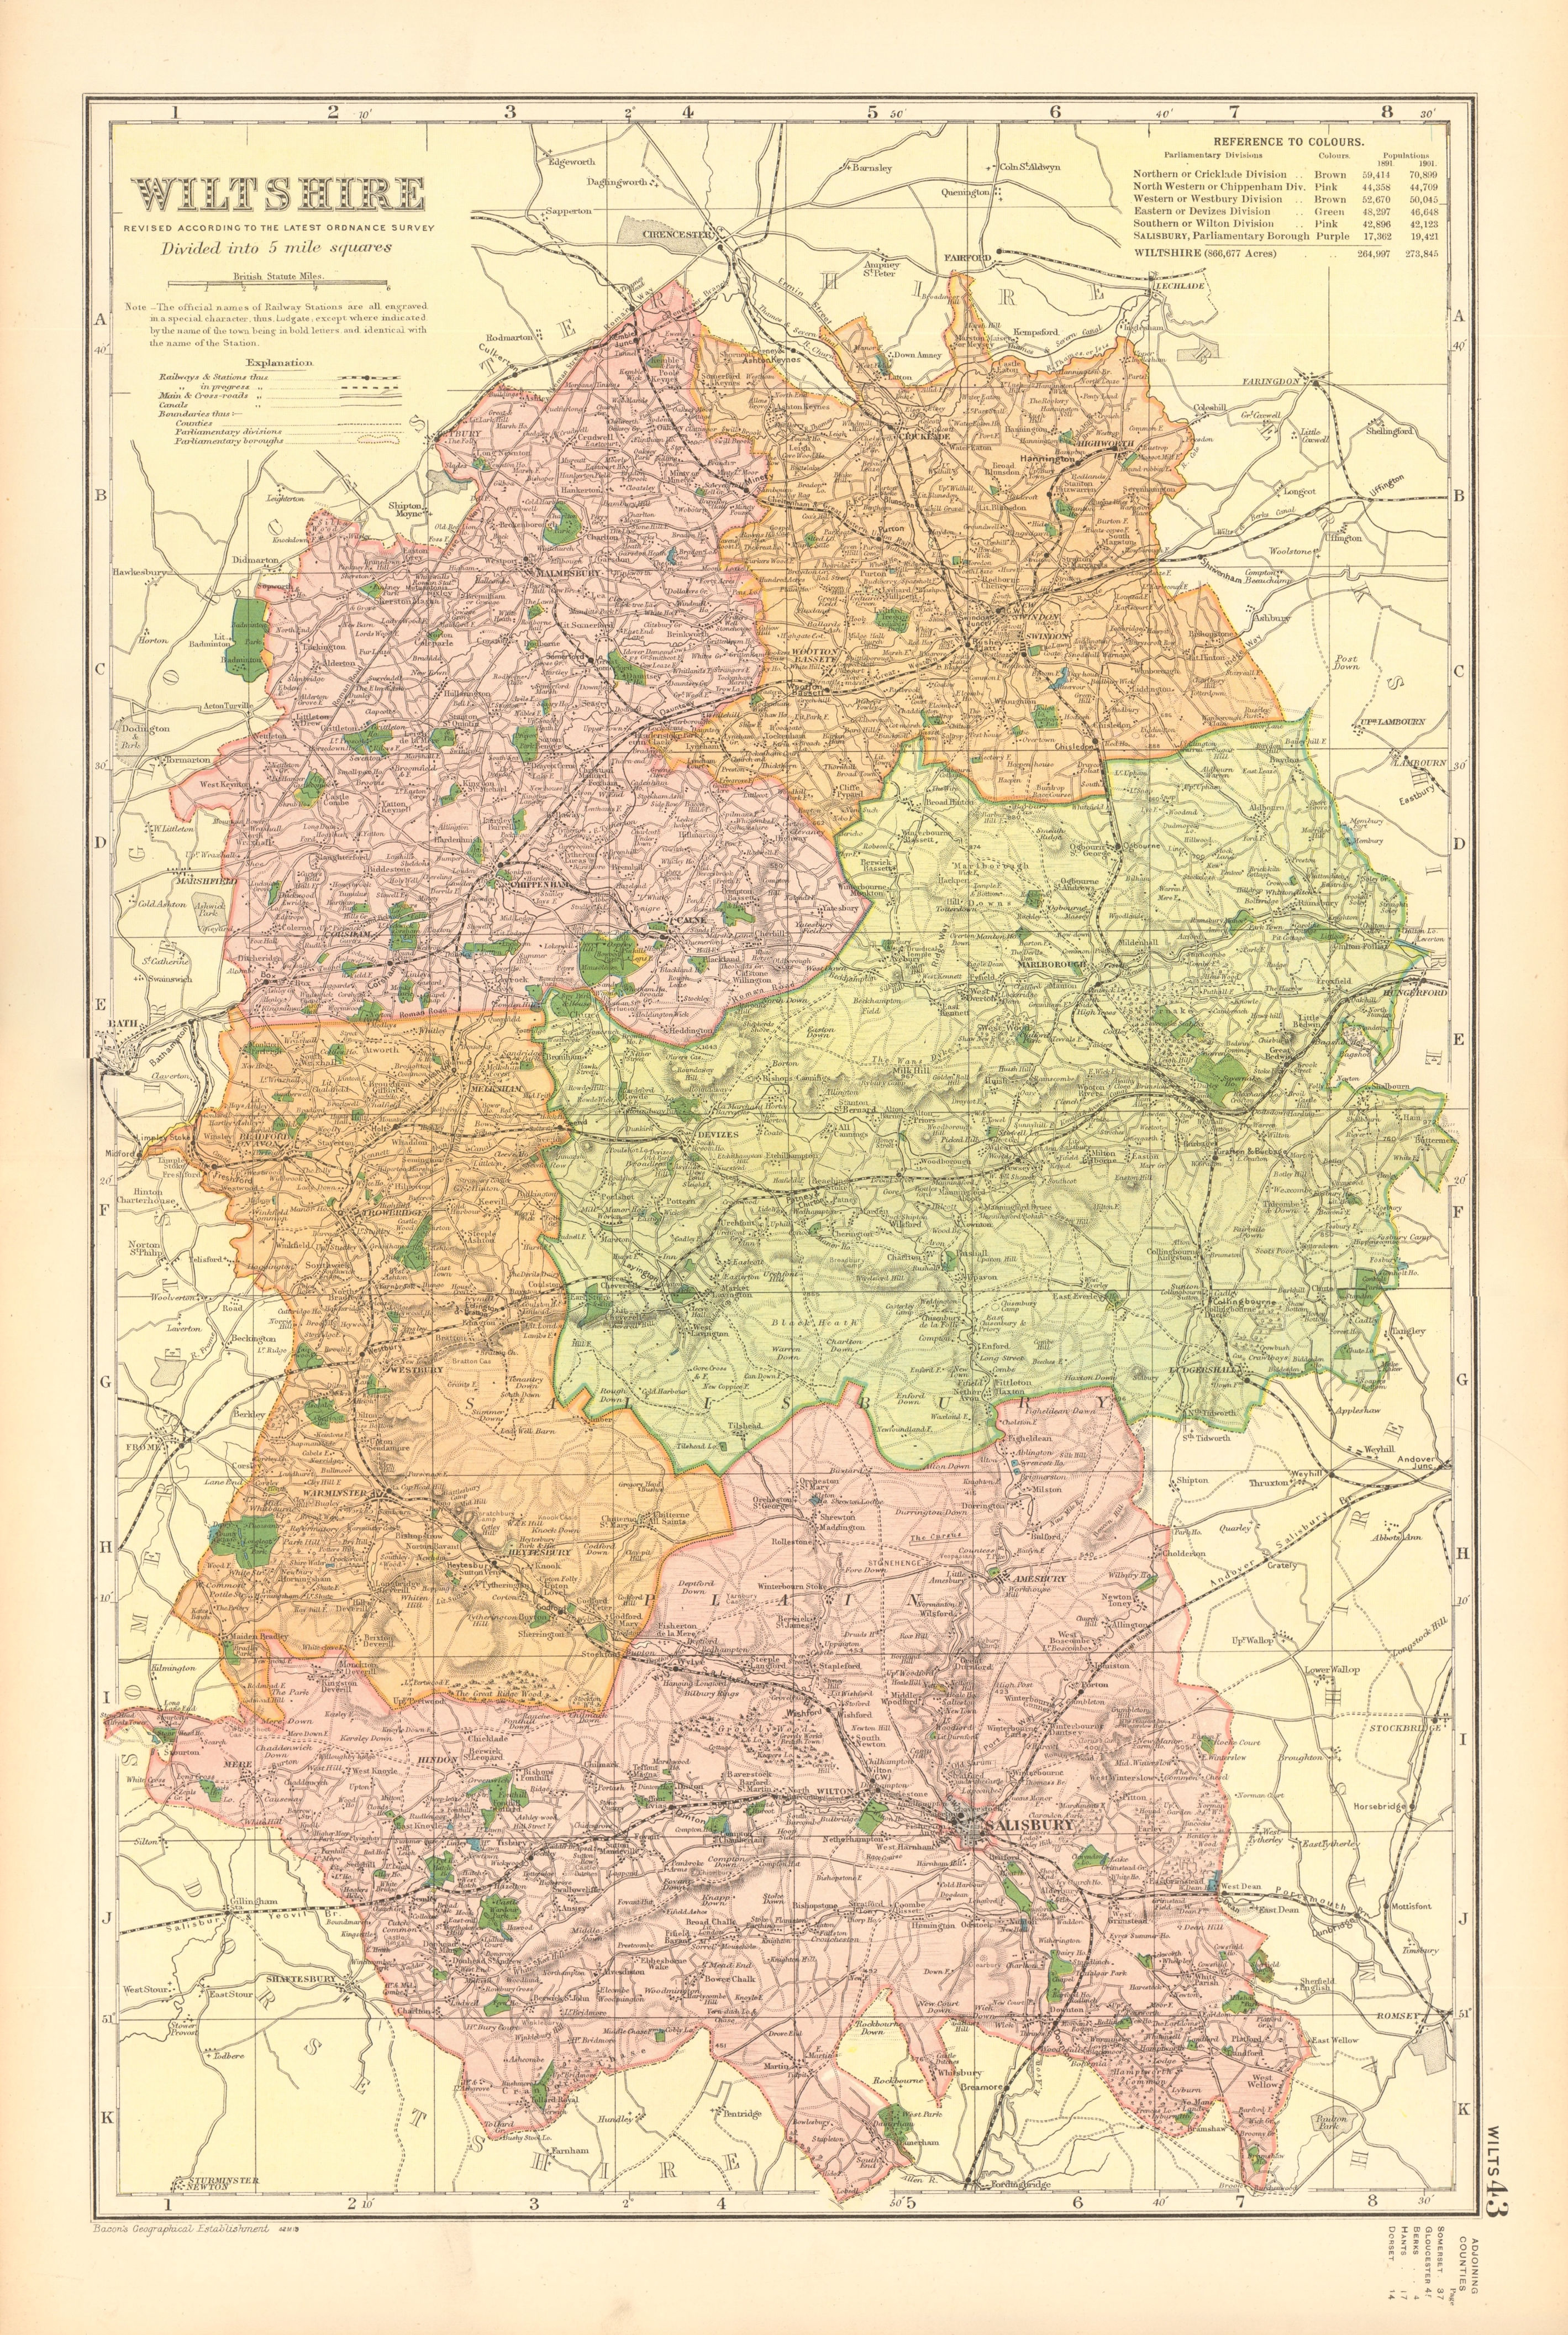 Associate Product WILTSHIRE. Showing Parliamentary divisions, boroughs & parks. BACON 1904 map